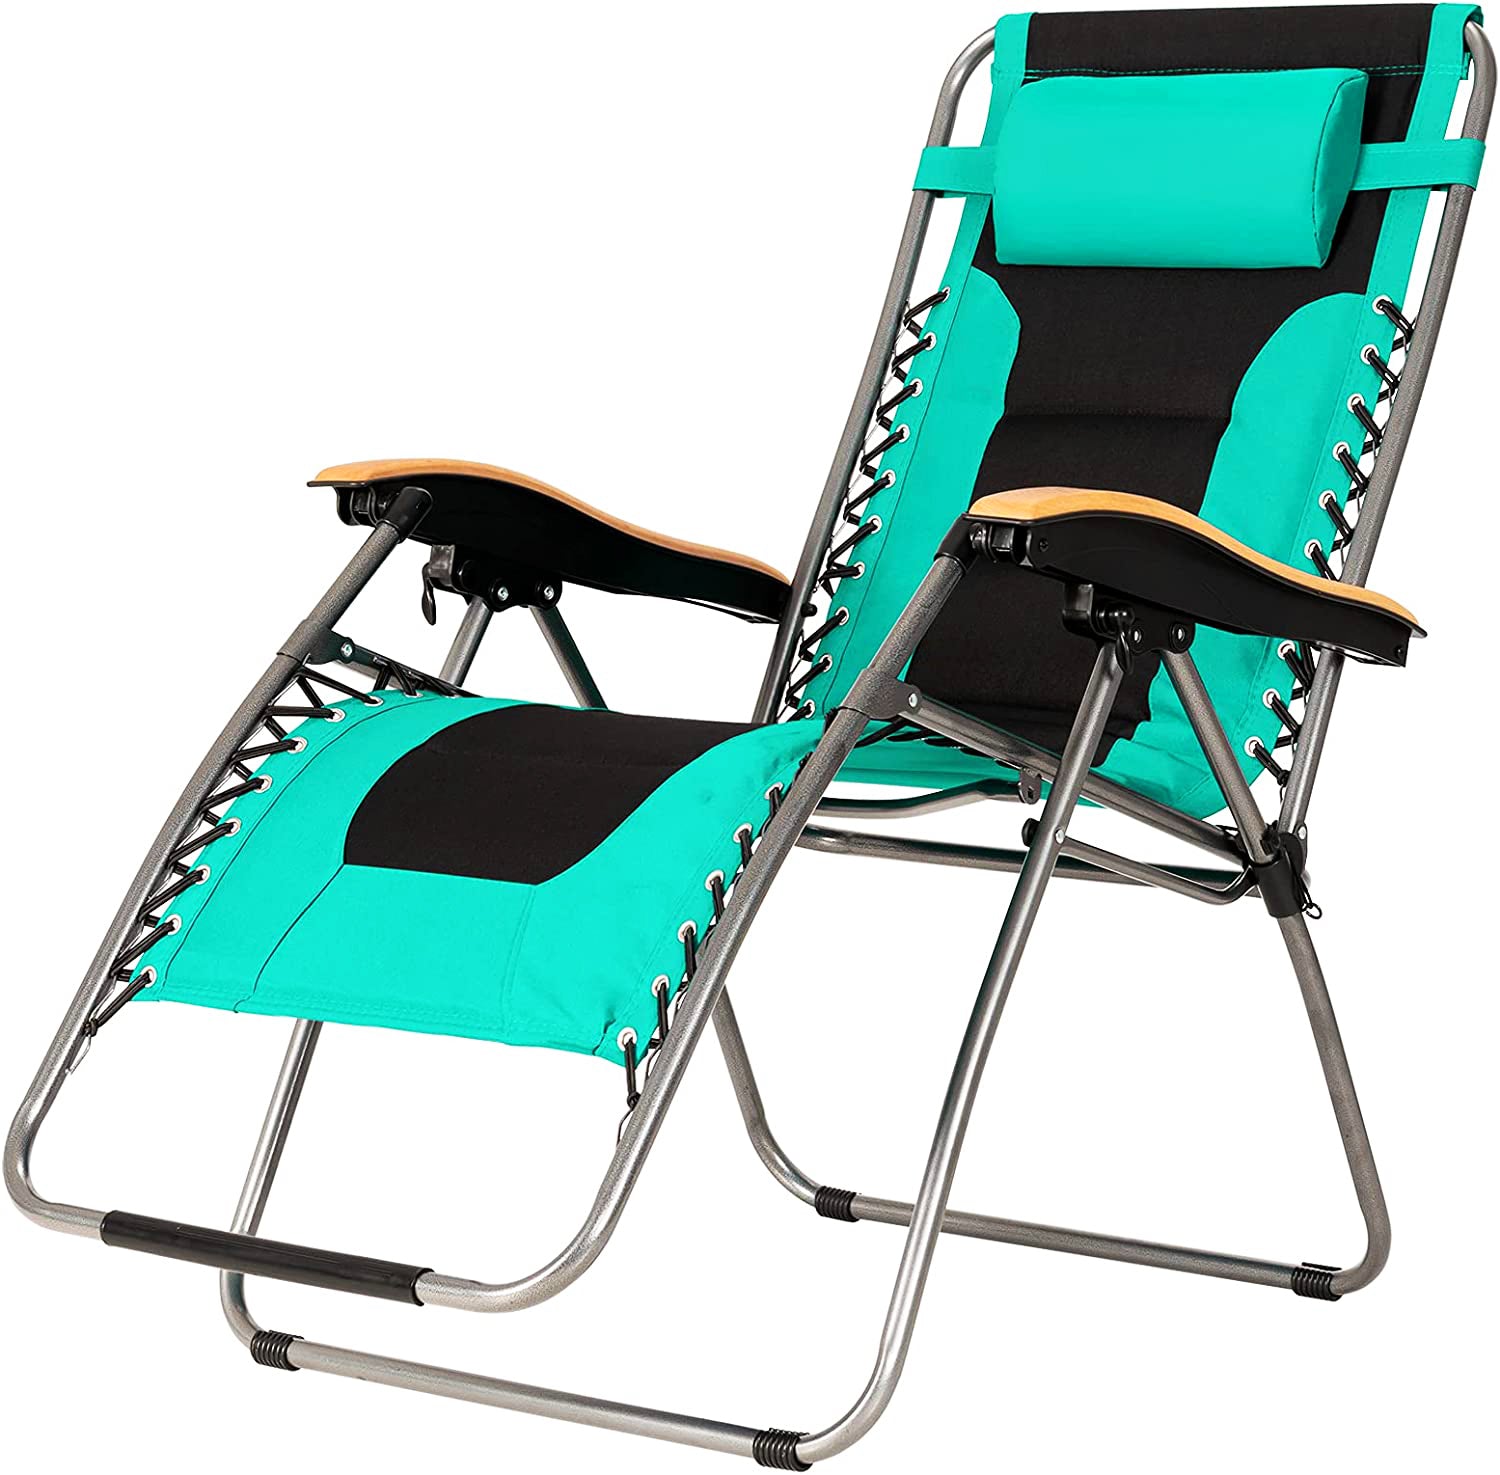 Oversize Folding Adjustable Steel Outdoor Lounge Chair in Turquoise